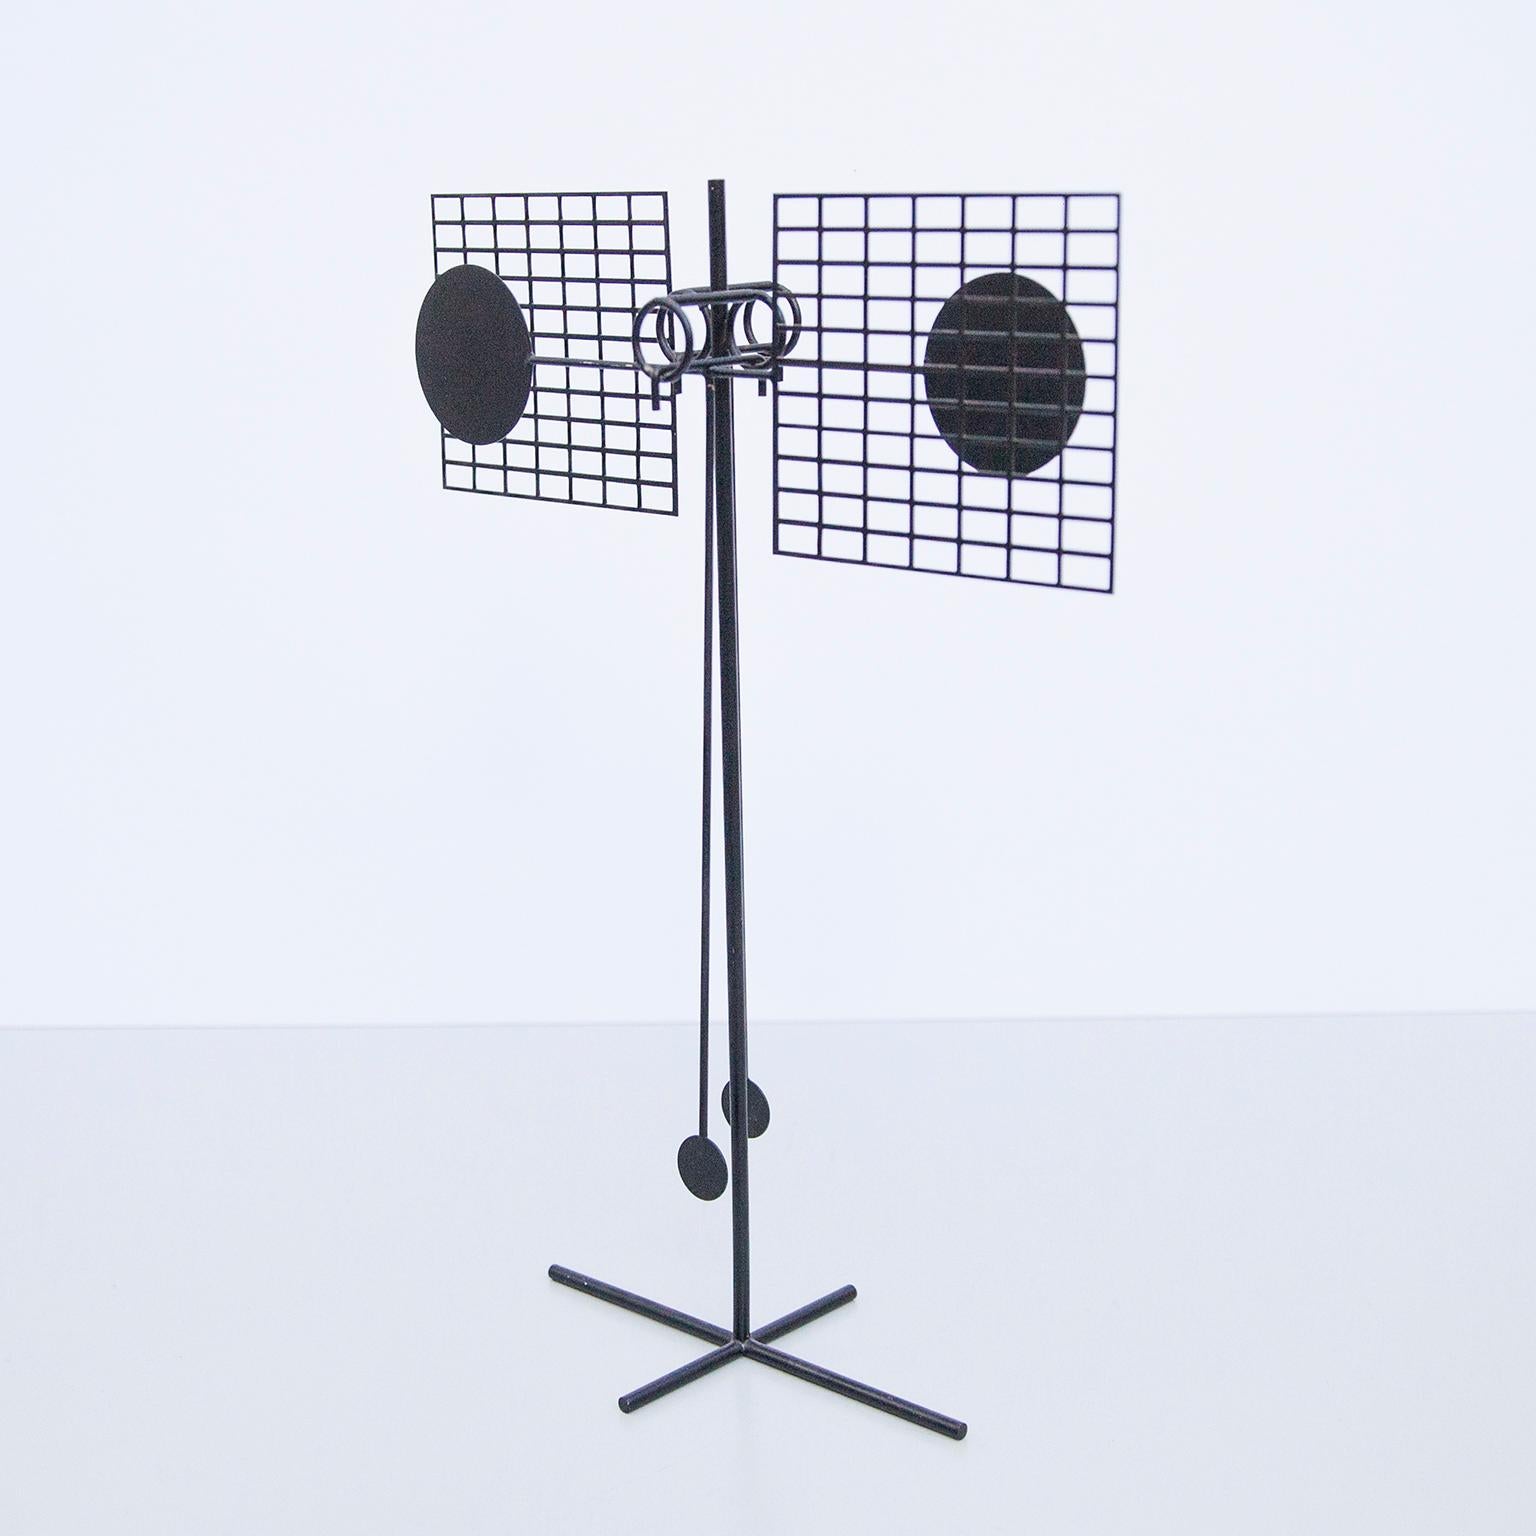 Kinetic pendulum object, made of black painted iron. Signed and dated with stamp: AH 73. Arnulf Hoffmann is a German creative visual artist. Arnulf Hoffmann was born in 1935. Also born in 1935 and of this same generation are Biagio Civale, Lieva